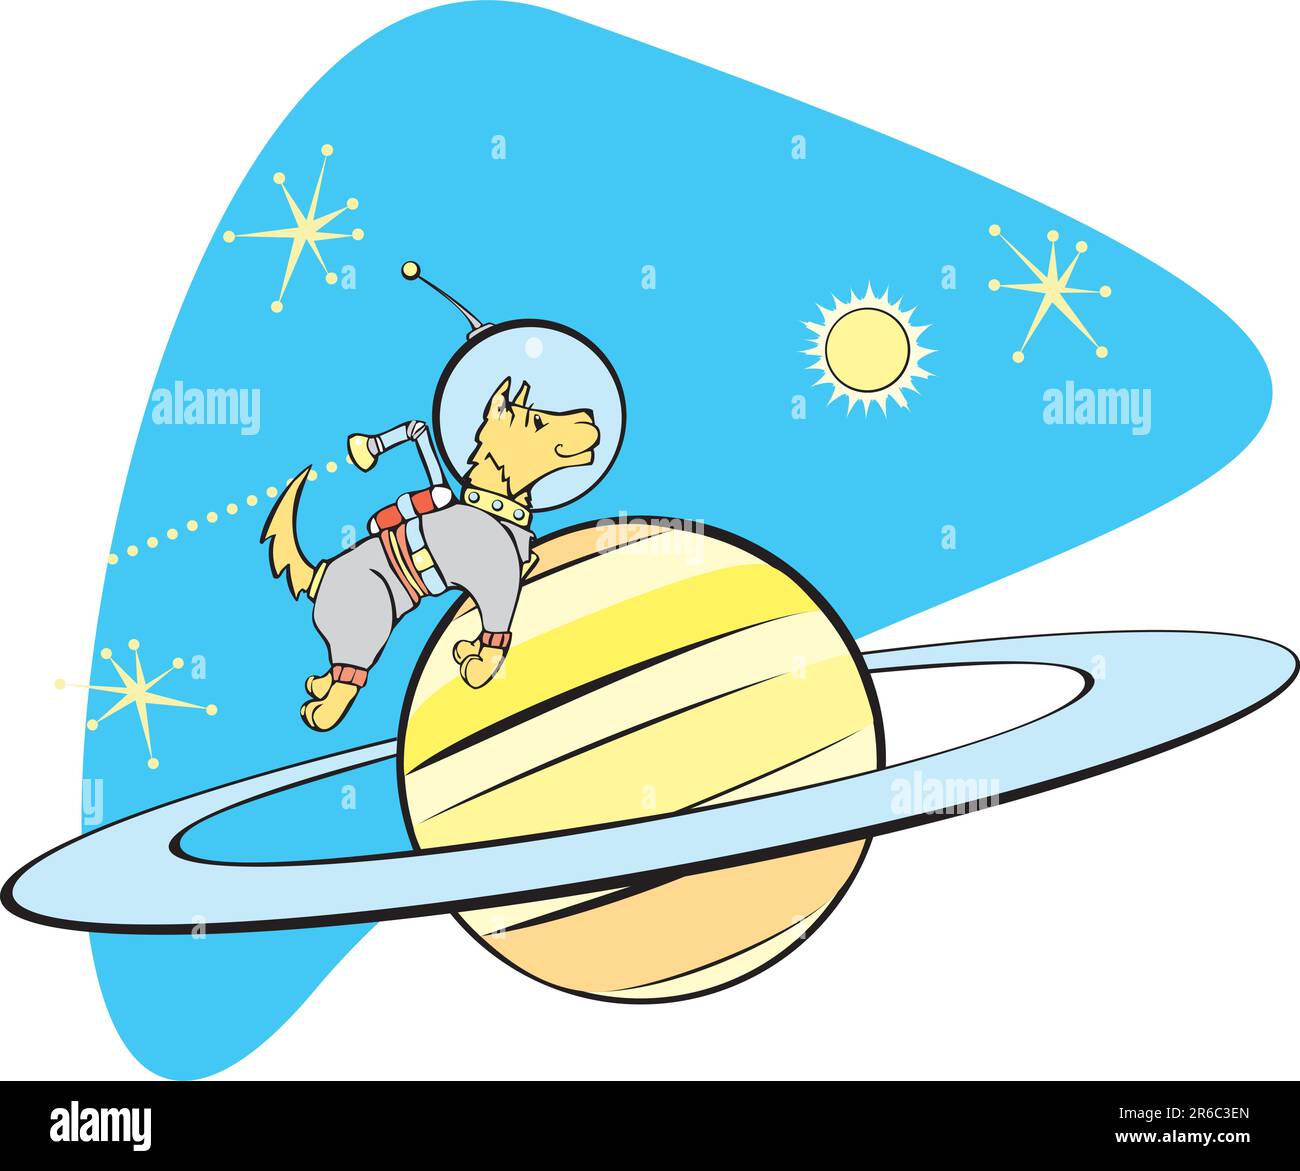 Retro Space Dog flies by planet Saturn. Stock Vector